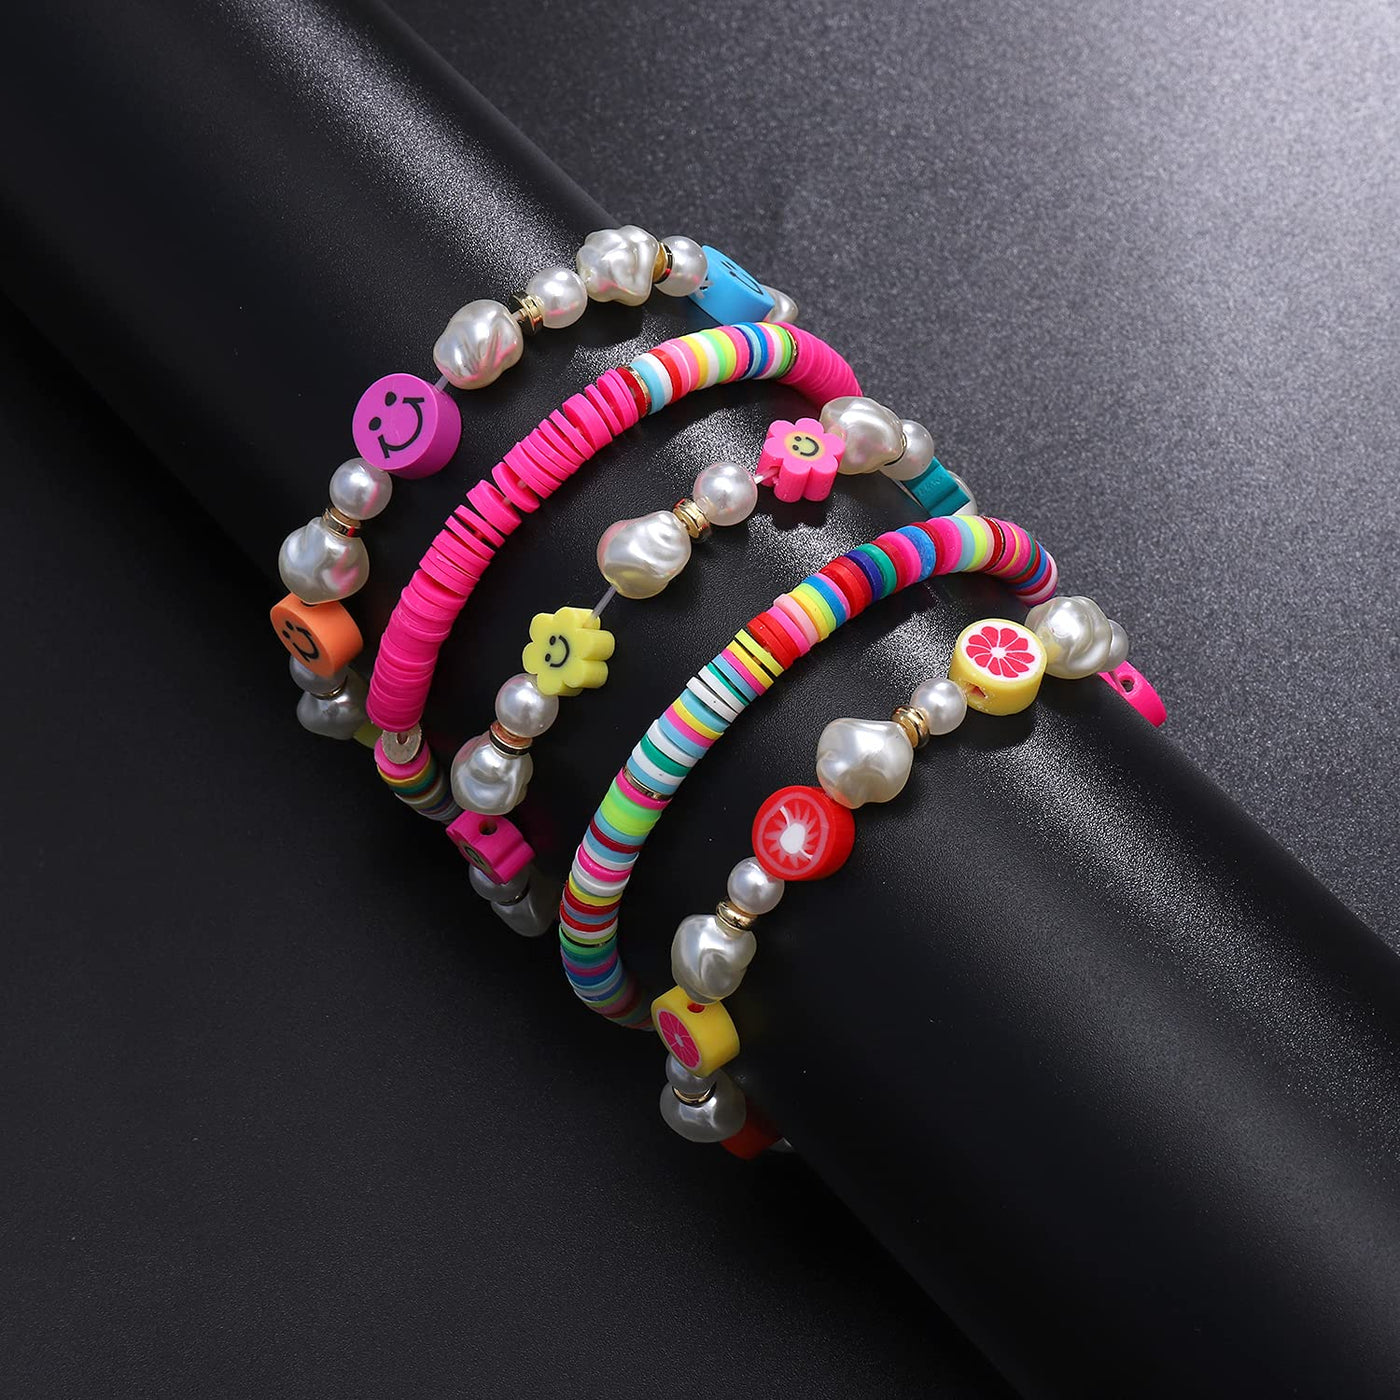 XOCARTIGE Beaded Stretch Bracelets for Women Colorful Clay Fruit